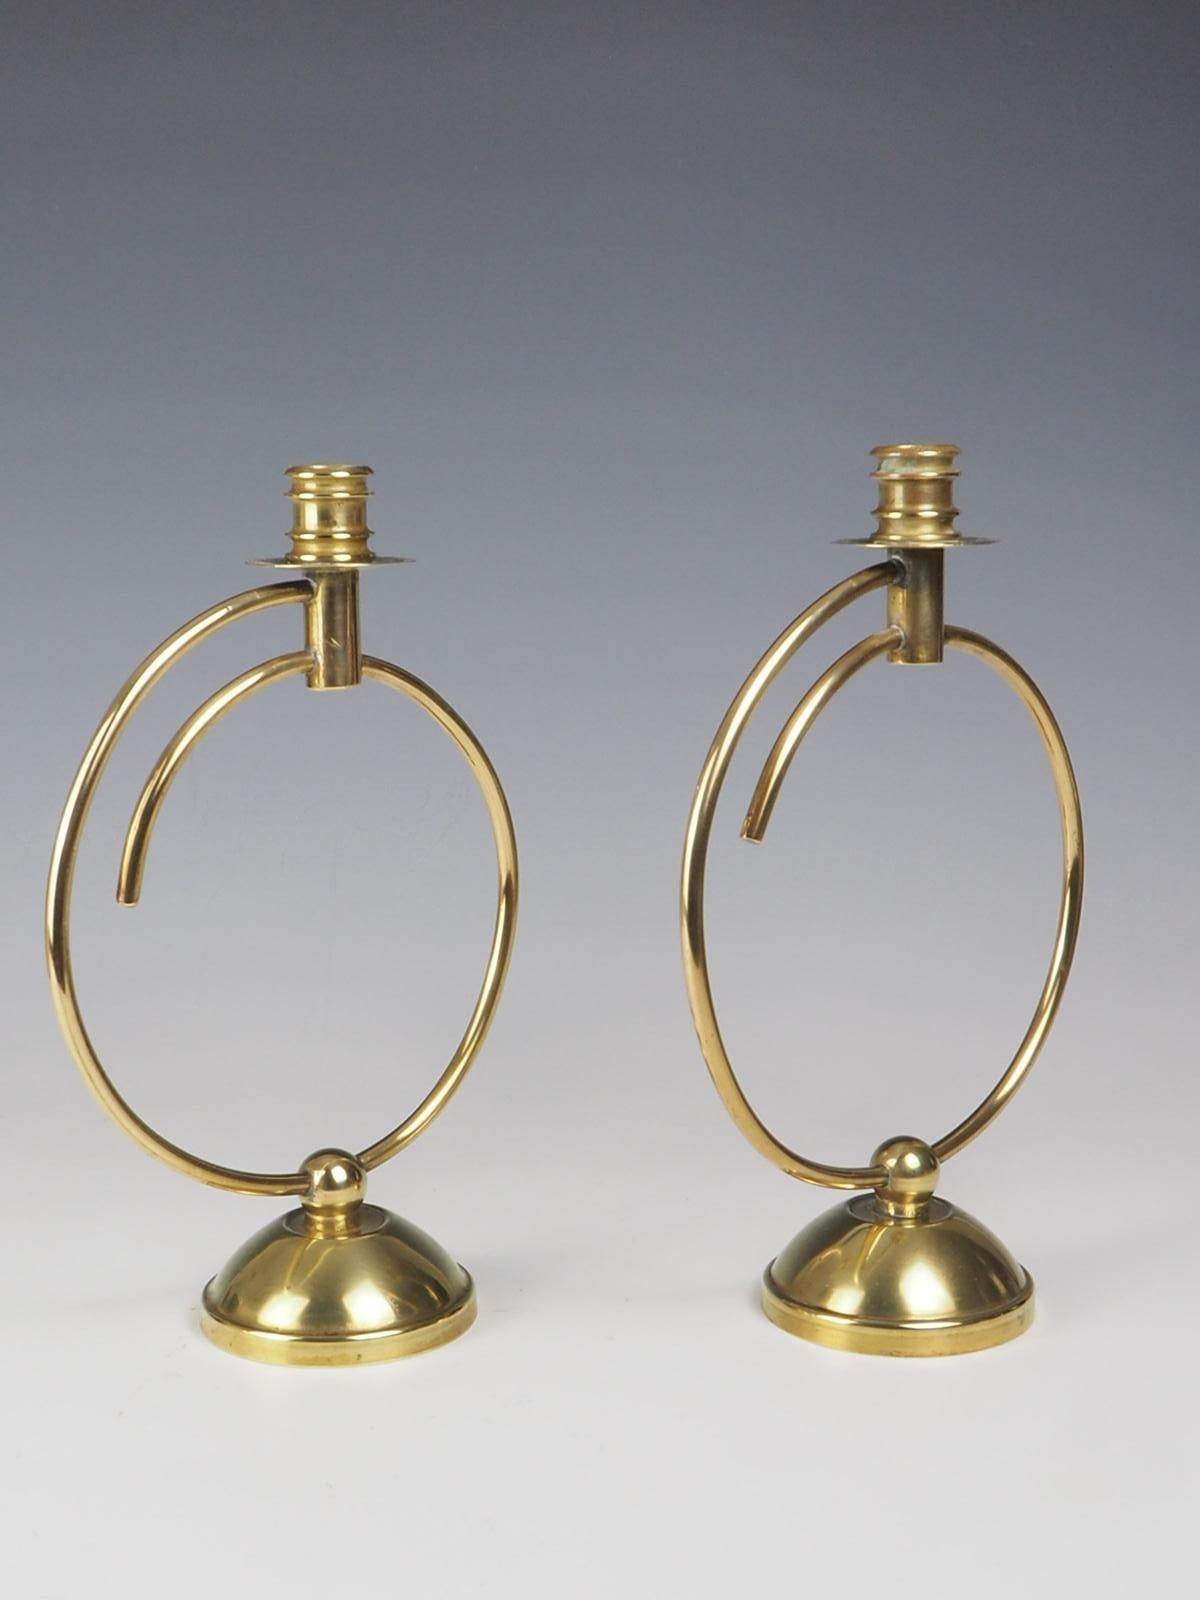 Pair of Art Deco Brass Candlesticks In Good Condition For Sale In Lincoln, GB